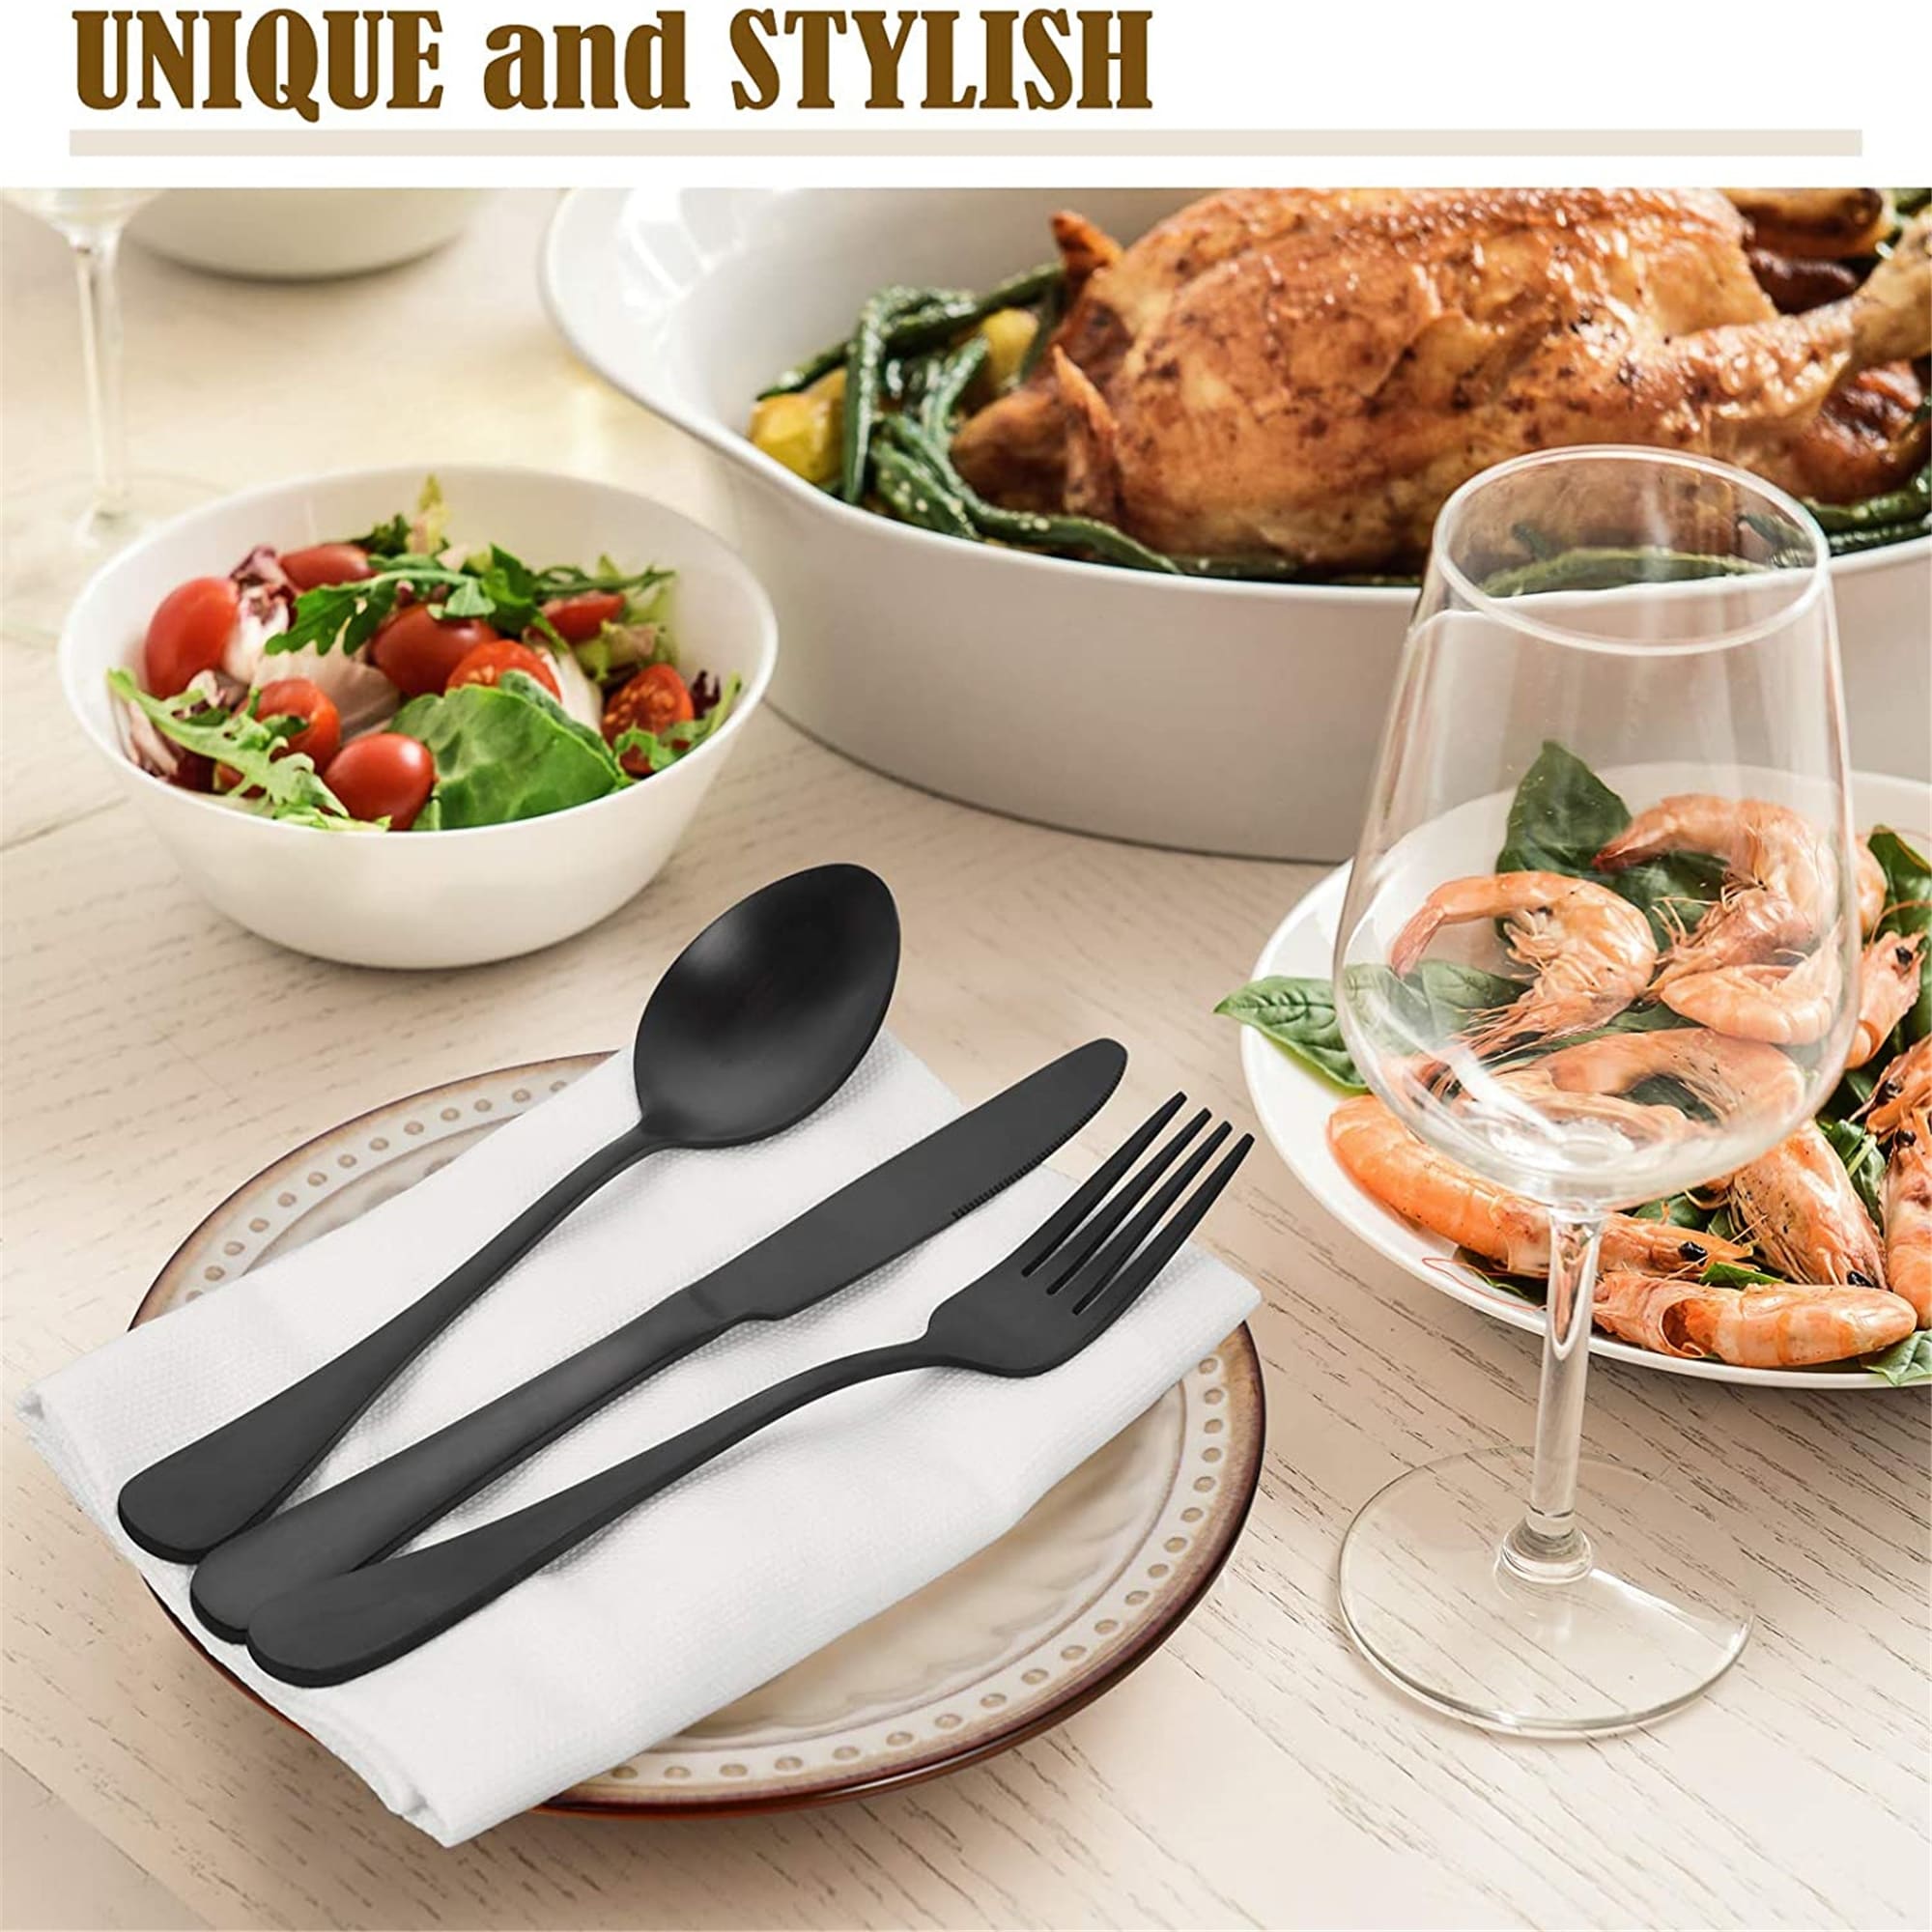 https://ak1.ostkcdn.com/images/products/is/images/direct/b345add1c2380596c455f2ab78e6e28db0b9e62e/48-Piece-Matte-Black-Silverware-Set-for-8-by-Hiware%2C-Stainless-Steel-Flatware-Set-with-Steak-Knives.jpg